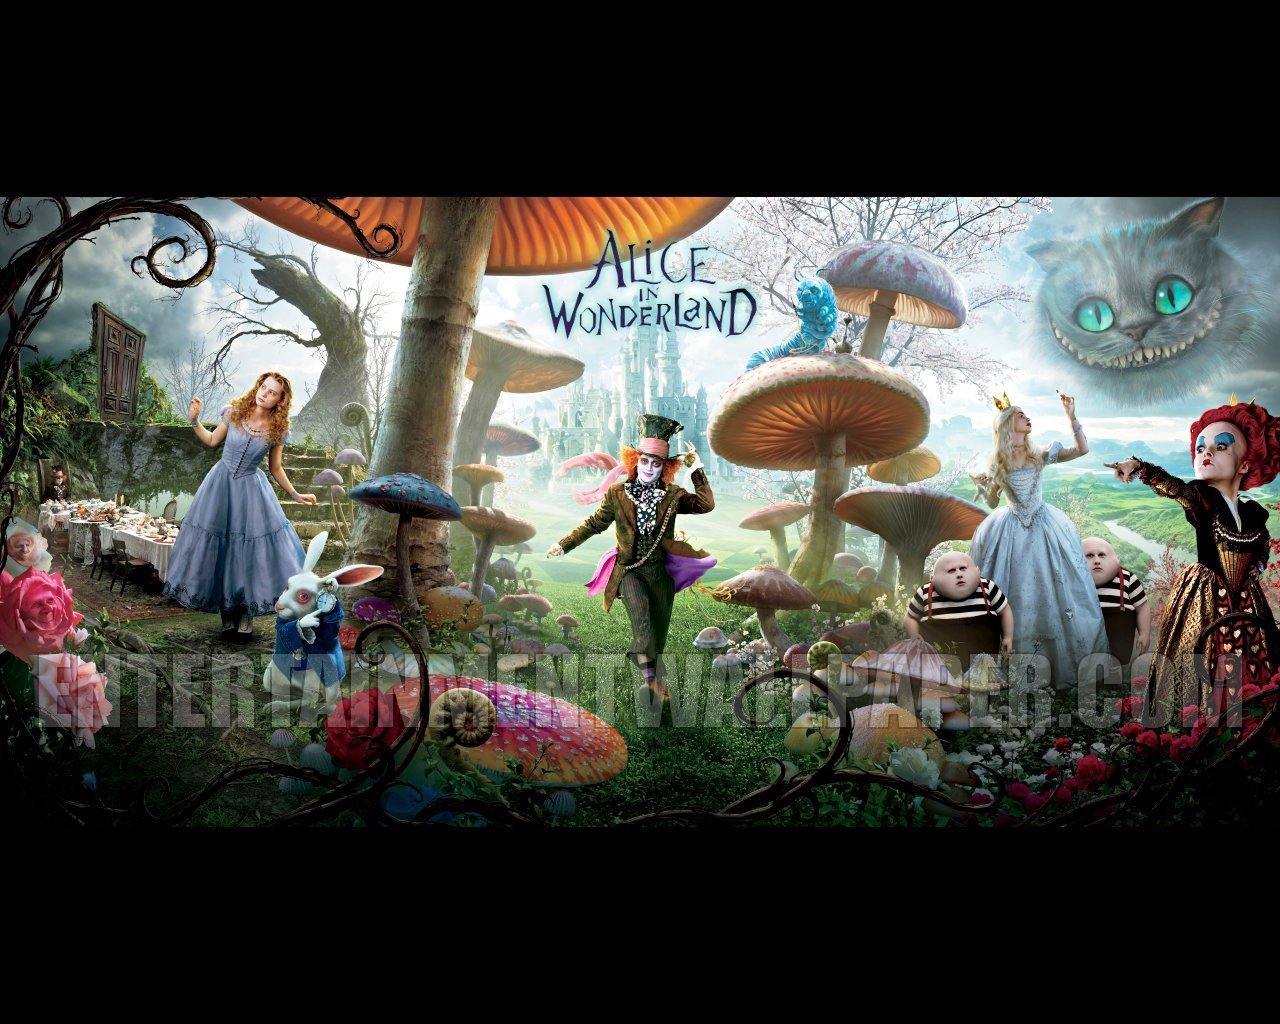 http://images2.fanpop.com/image/photos/9800000/Alice-in-Wonderland-2010-upcoming-movies-9873630-1280-1024.jpg